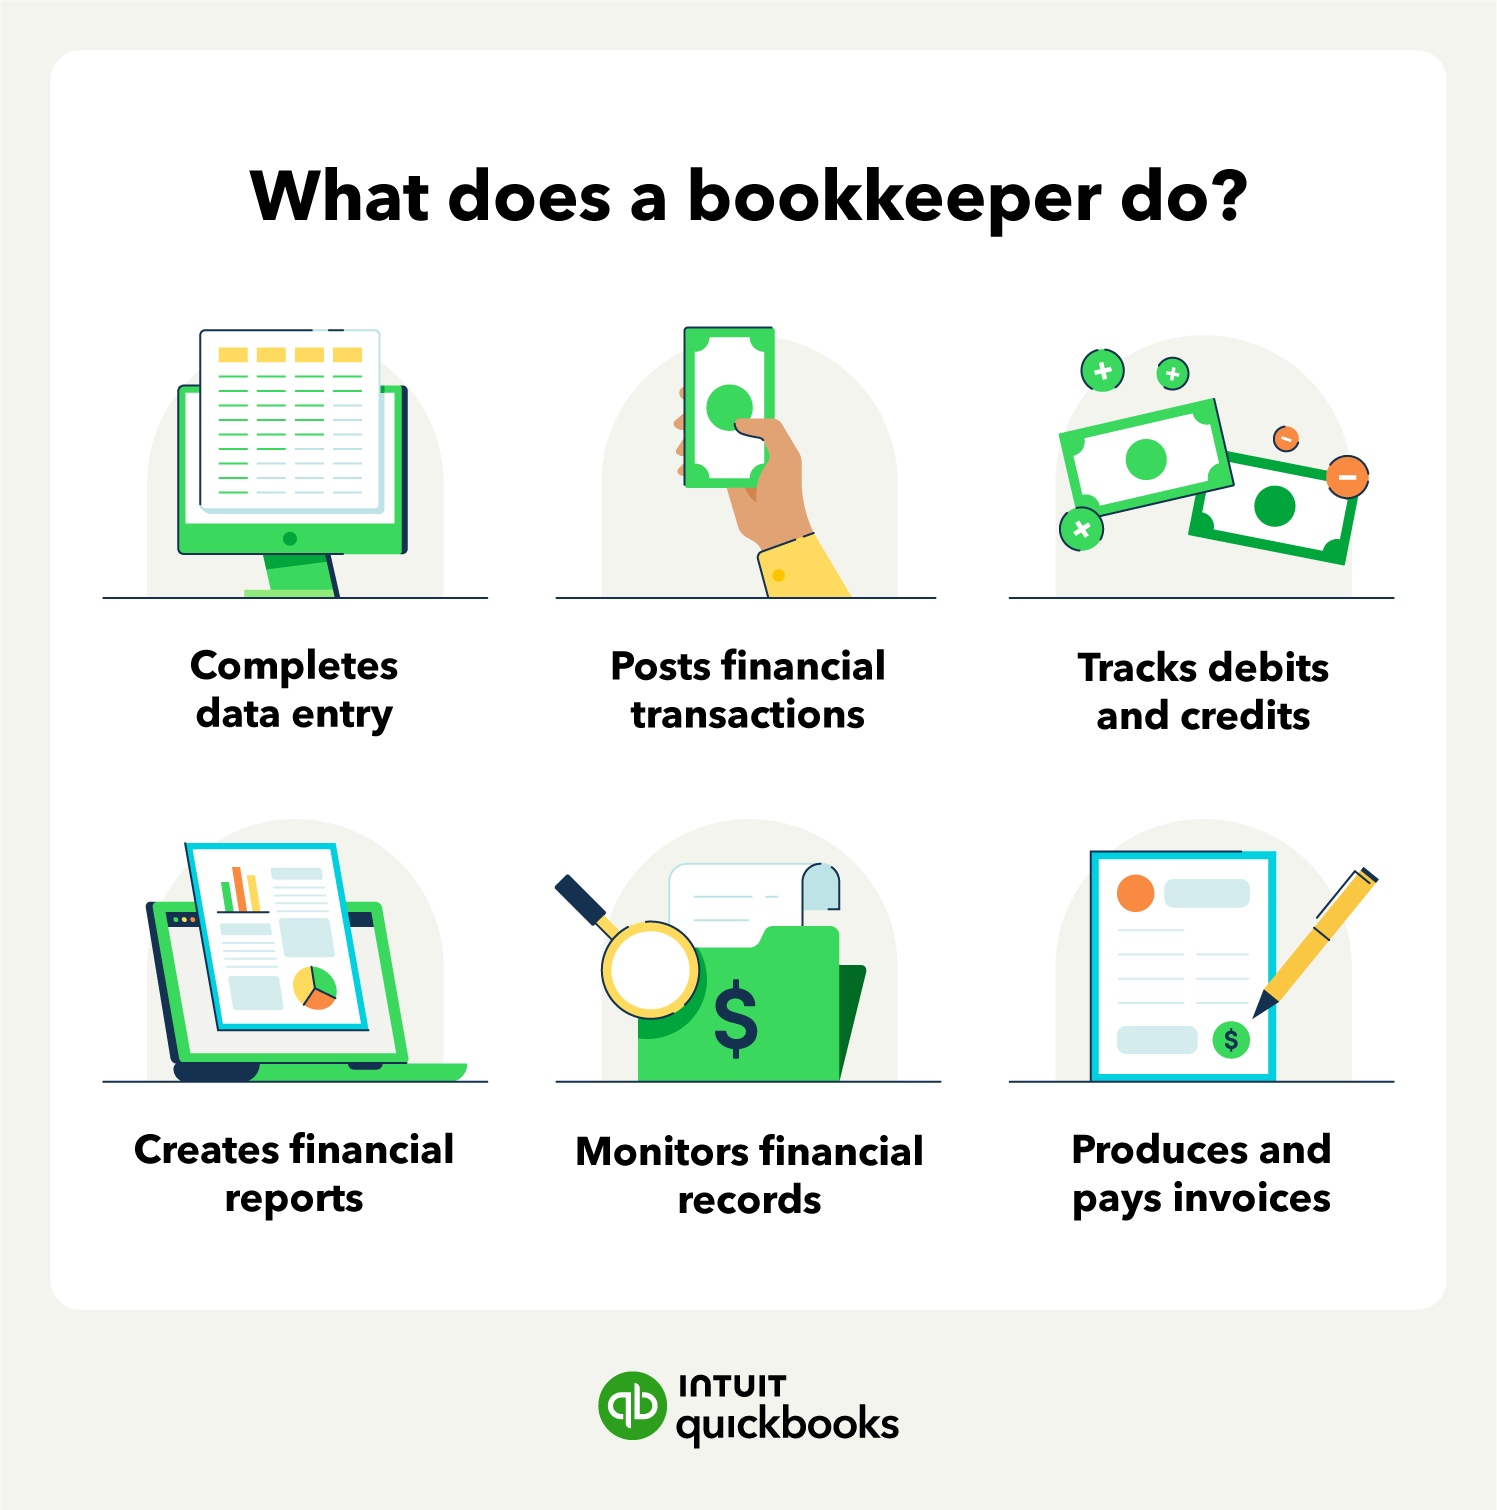 A list of bookkeeping duties and responsibilities.